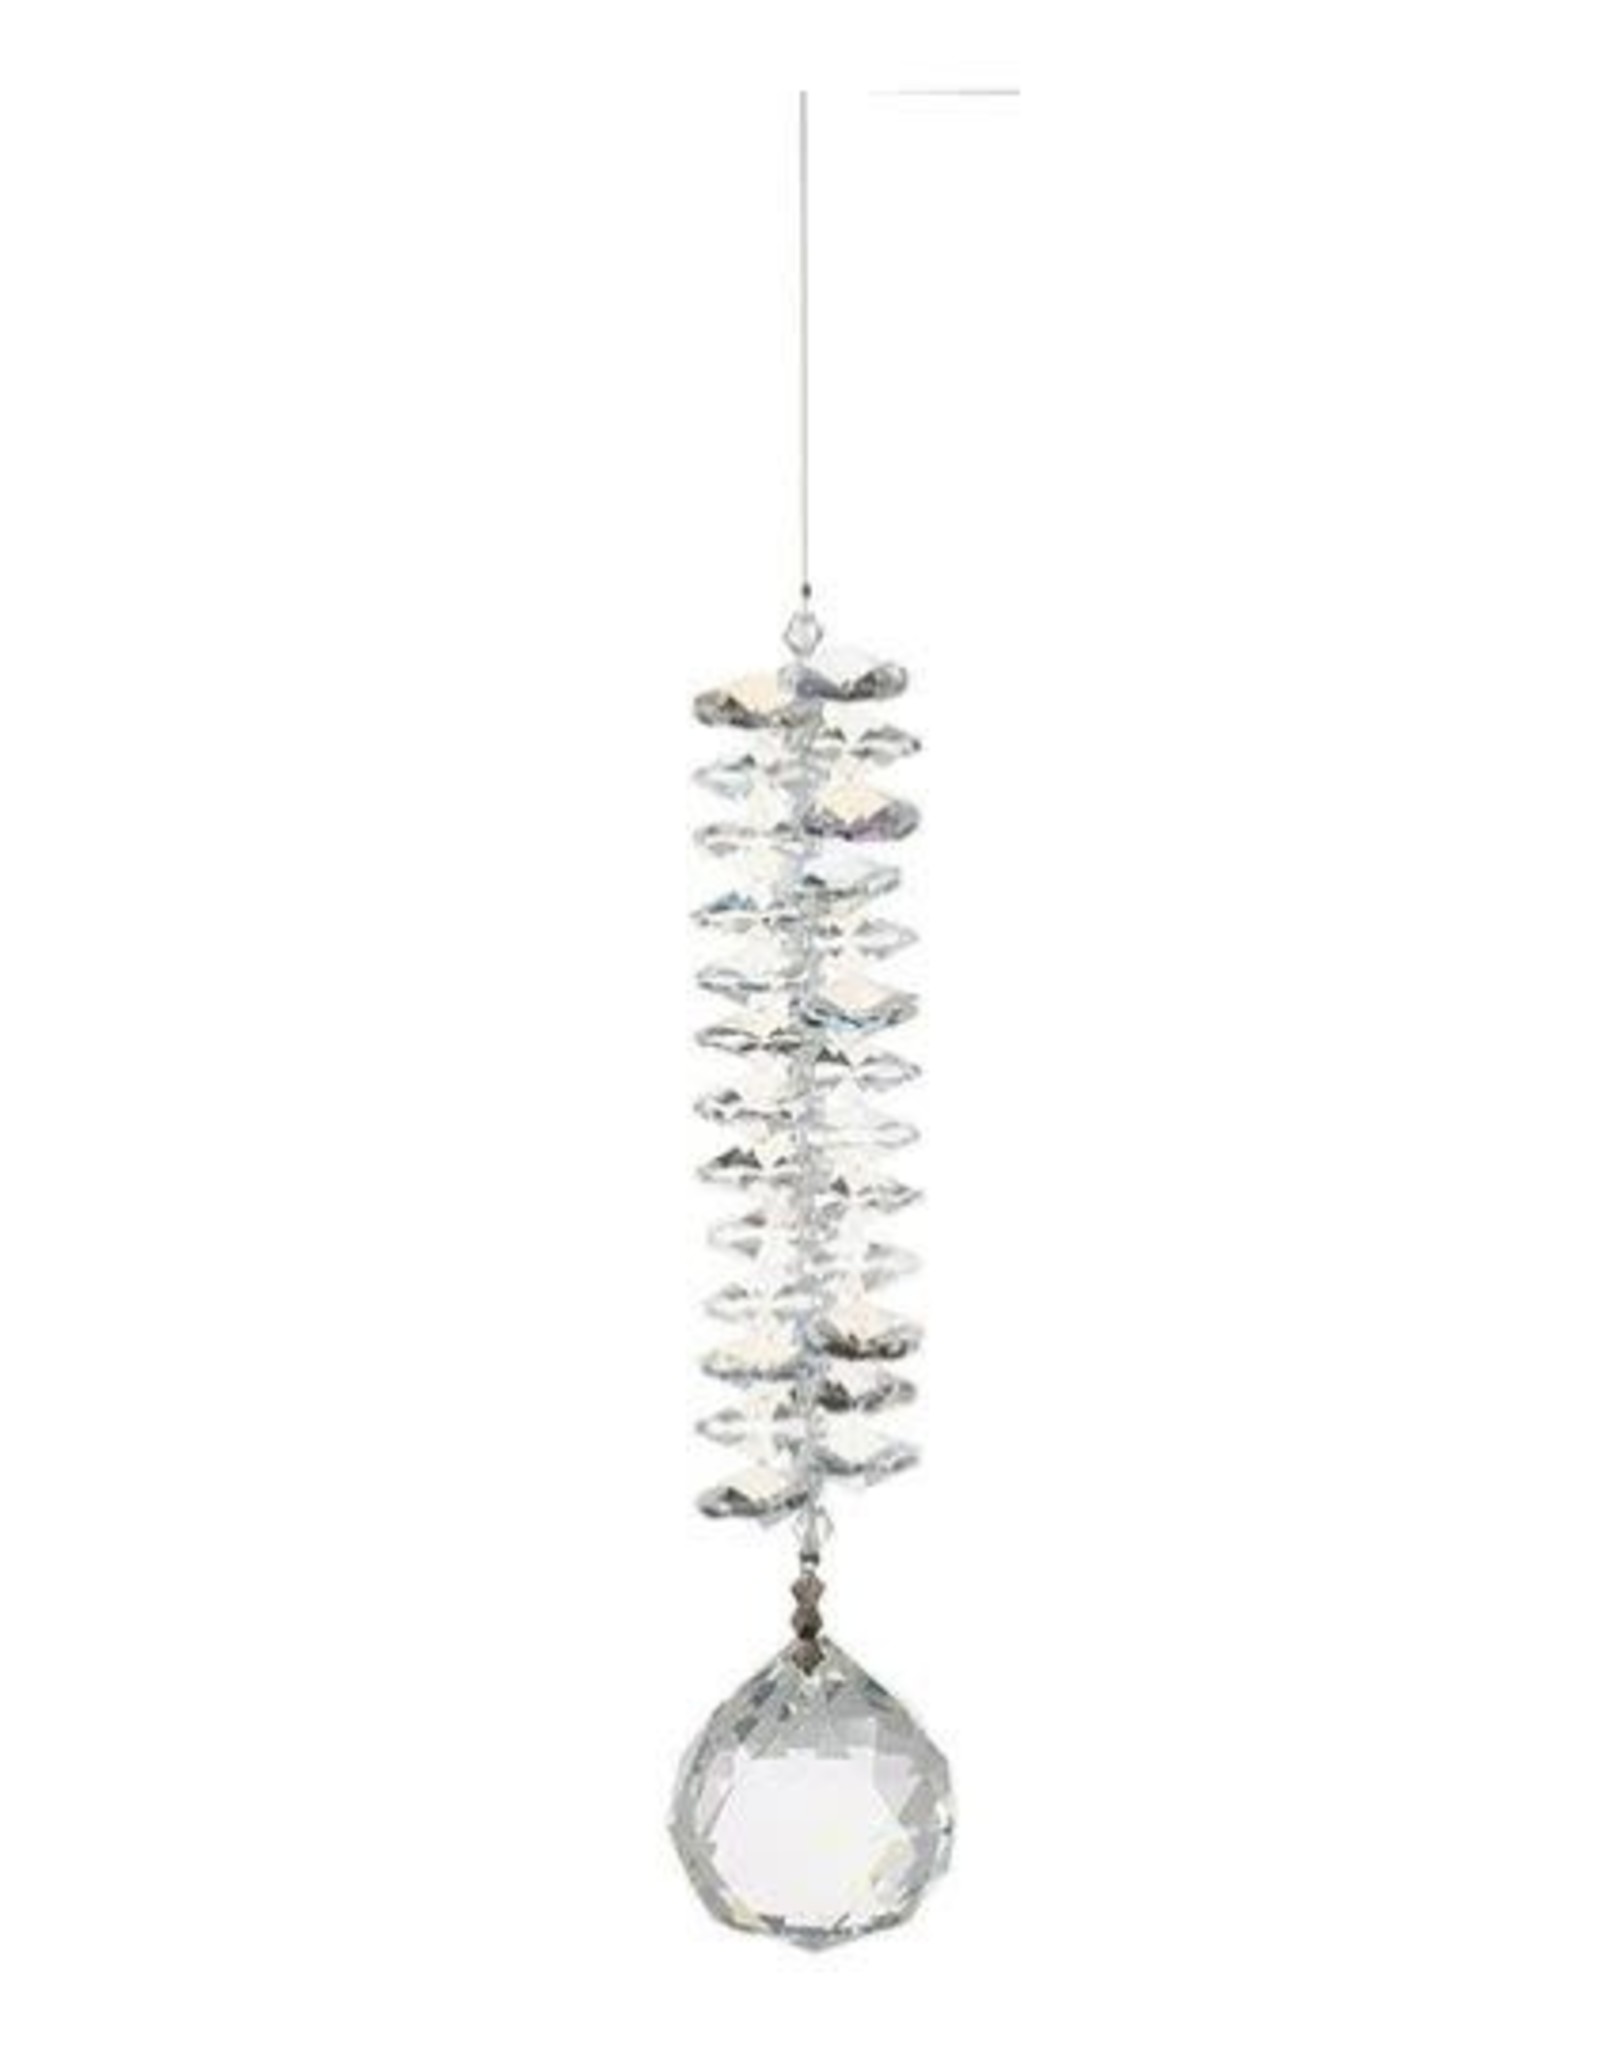 Crystal Art - Icicles Small - Clear